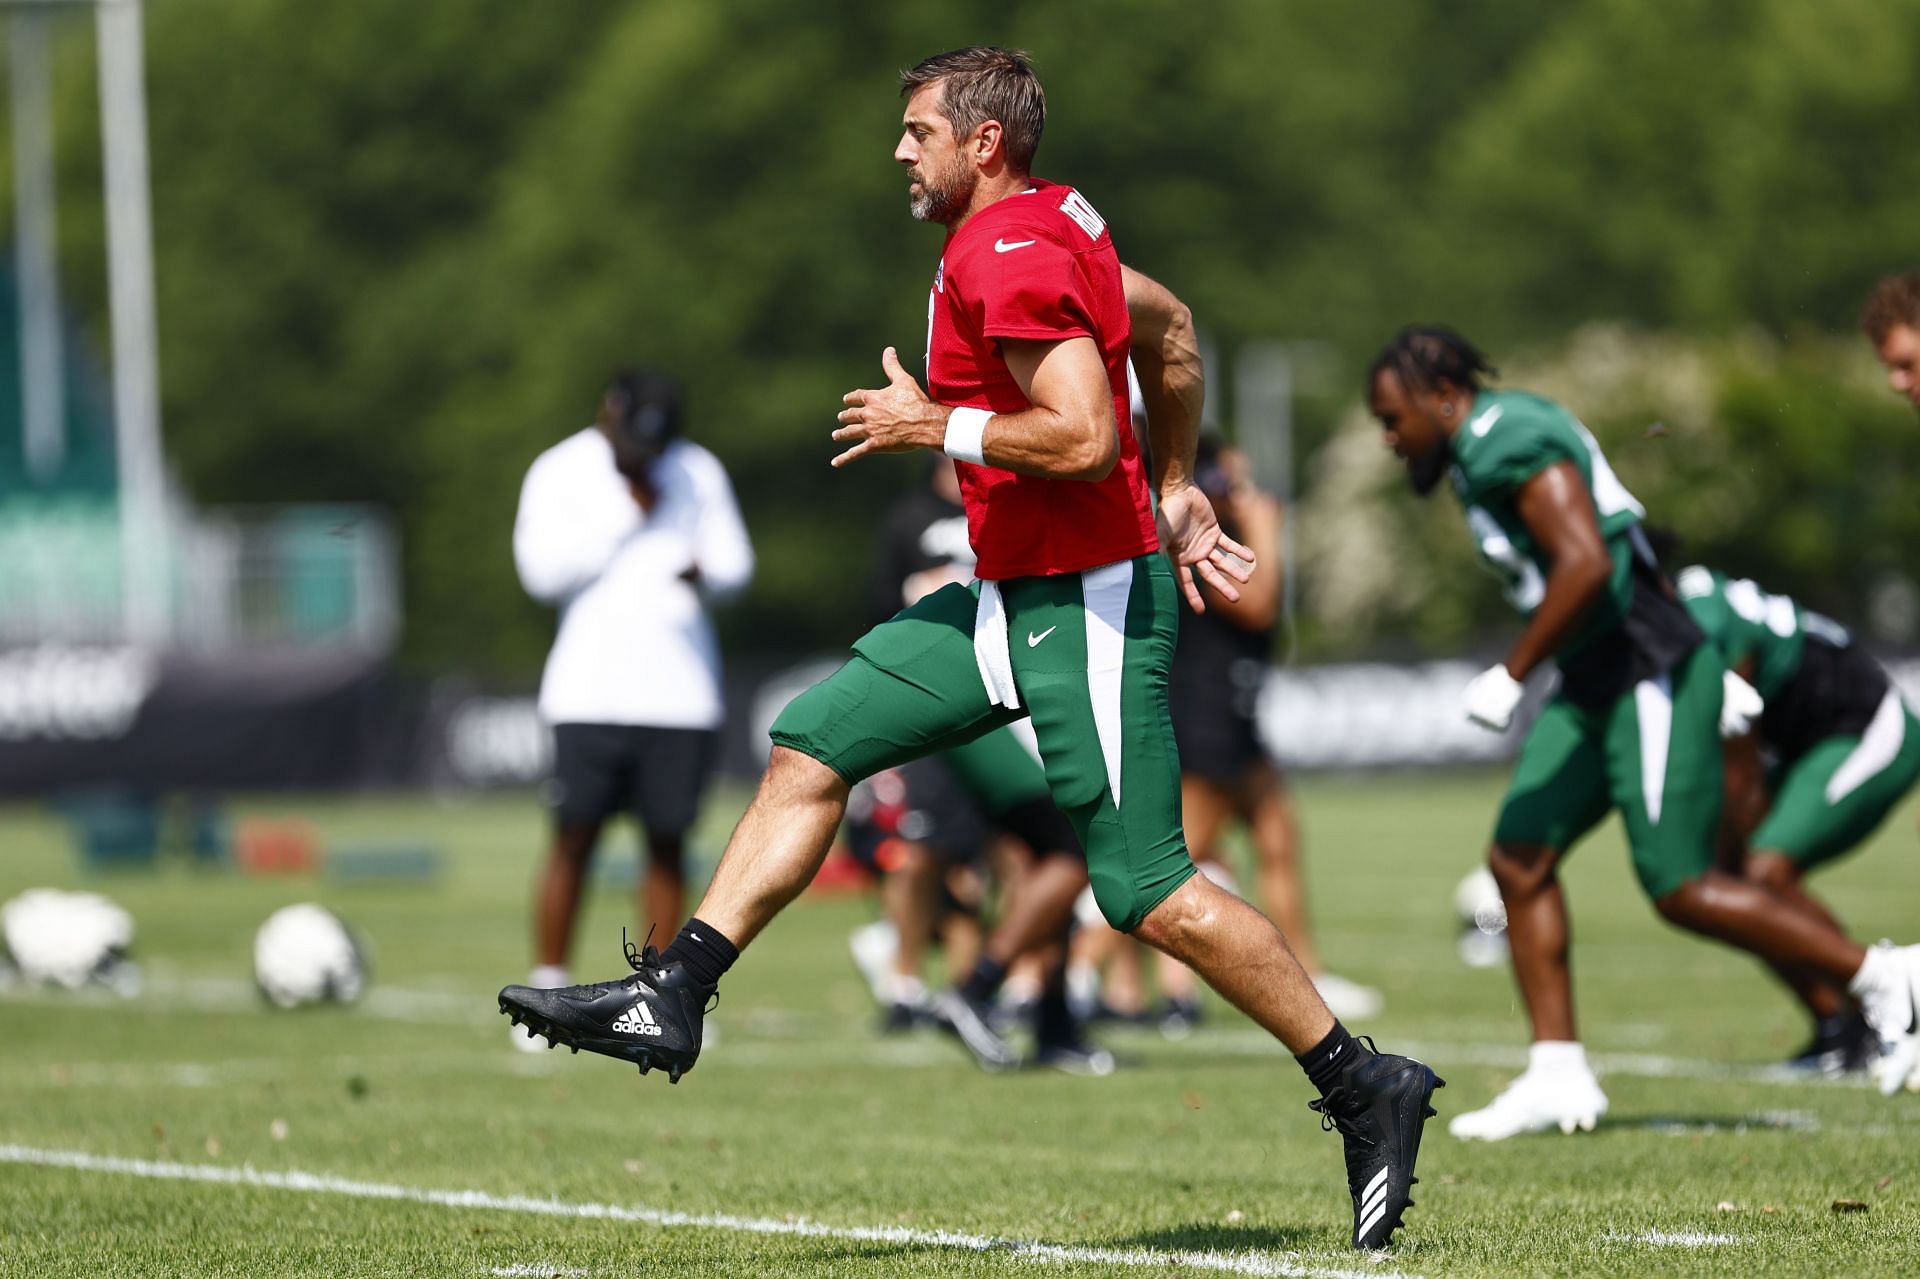 NFL notebook: Aaron Rodgers strains calf at Jets practice